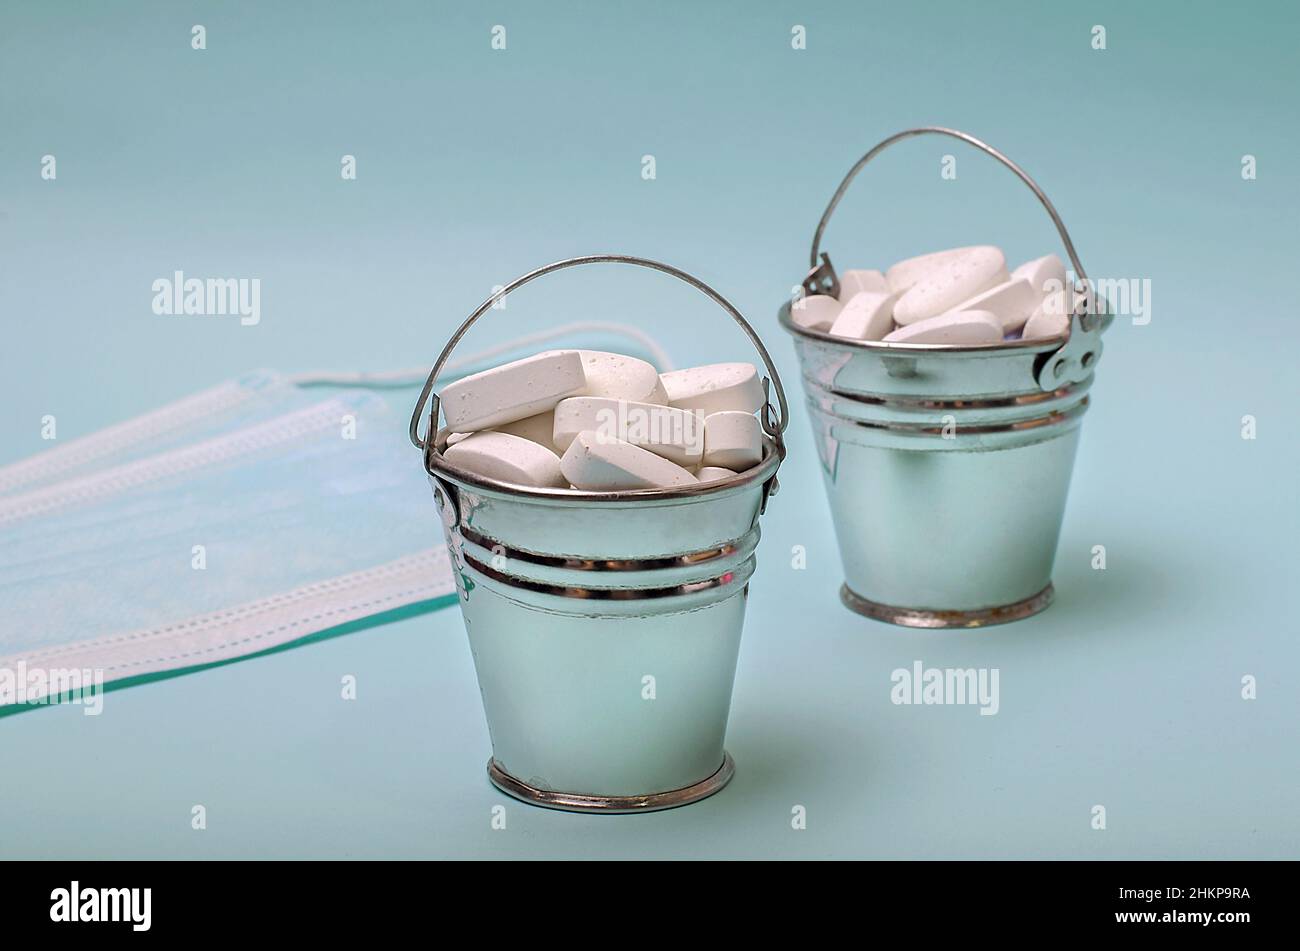 Miniature small buckets filled with pills Stock Photo